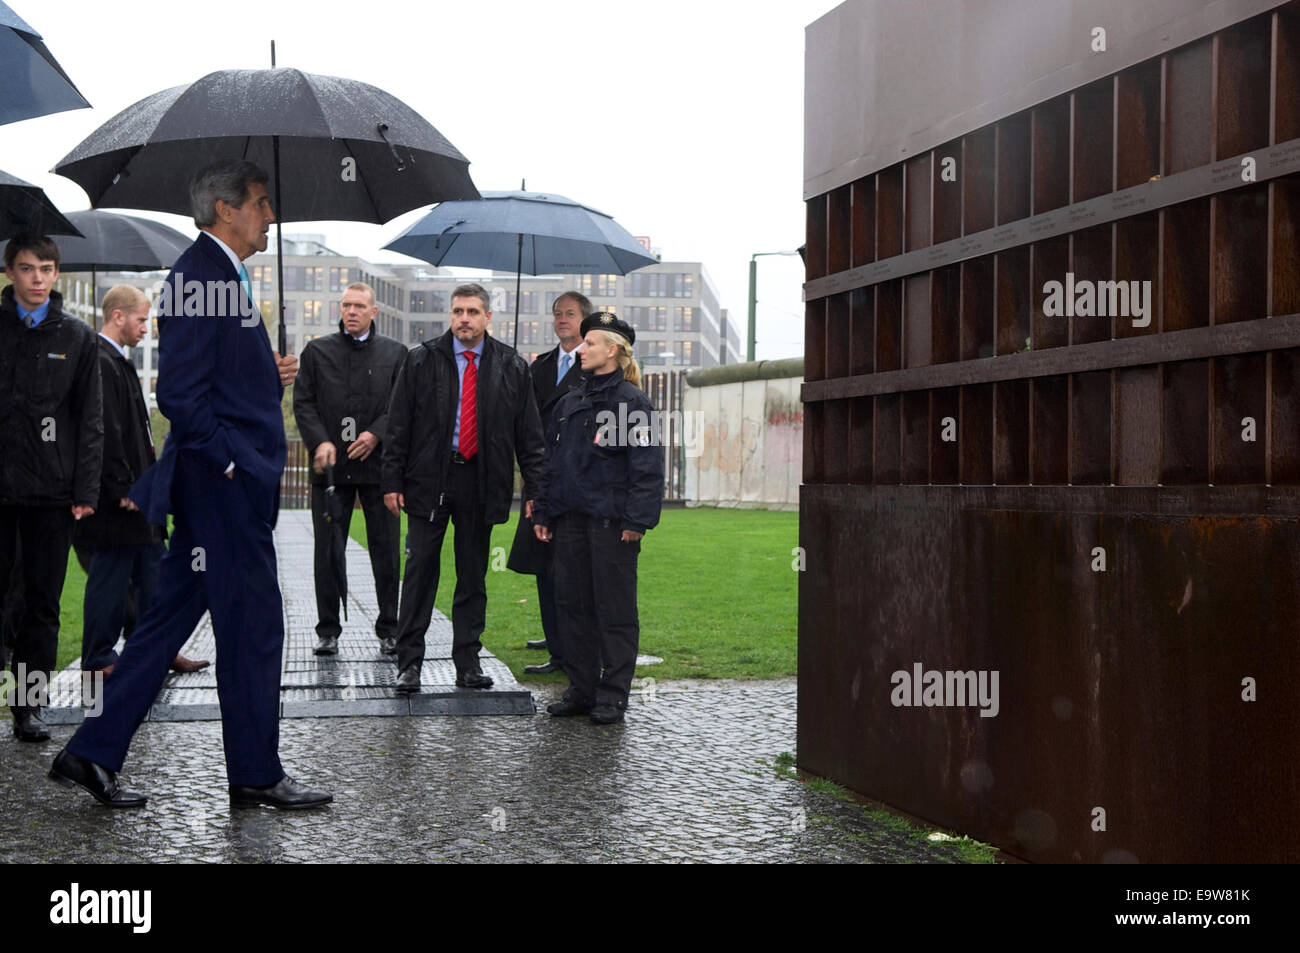 U.S. Secretary of State John Kerry approaches a memorial dedicated to those killed fleeing East Germany as he toured the remnants of the Berlin Wall to mark the 25th anniversary of its fall, and before the Secretary held a bilateral meeting with German Ch Stock Photo